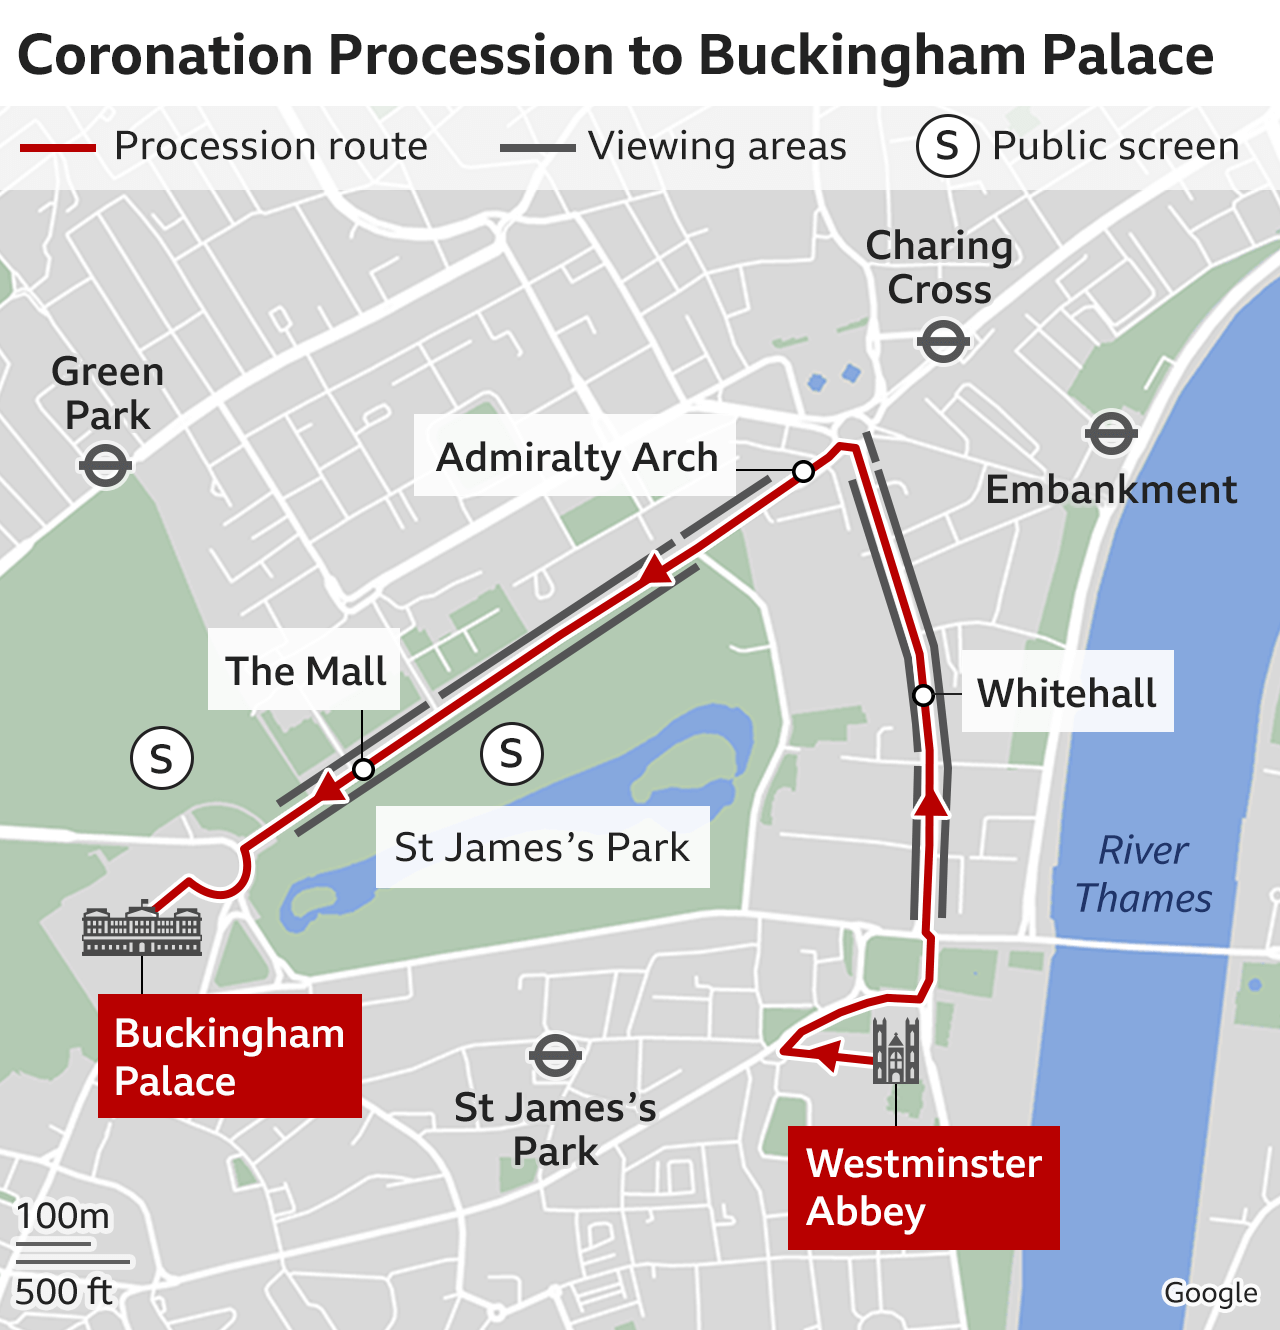 Map showing the Coronation Procession route from Westminster Abbey back to Buckingham Palace